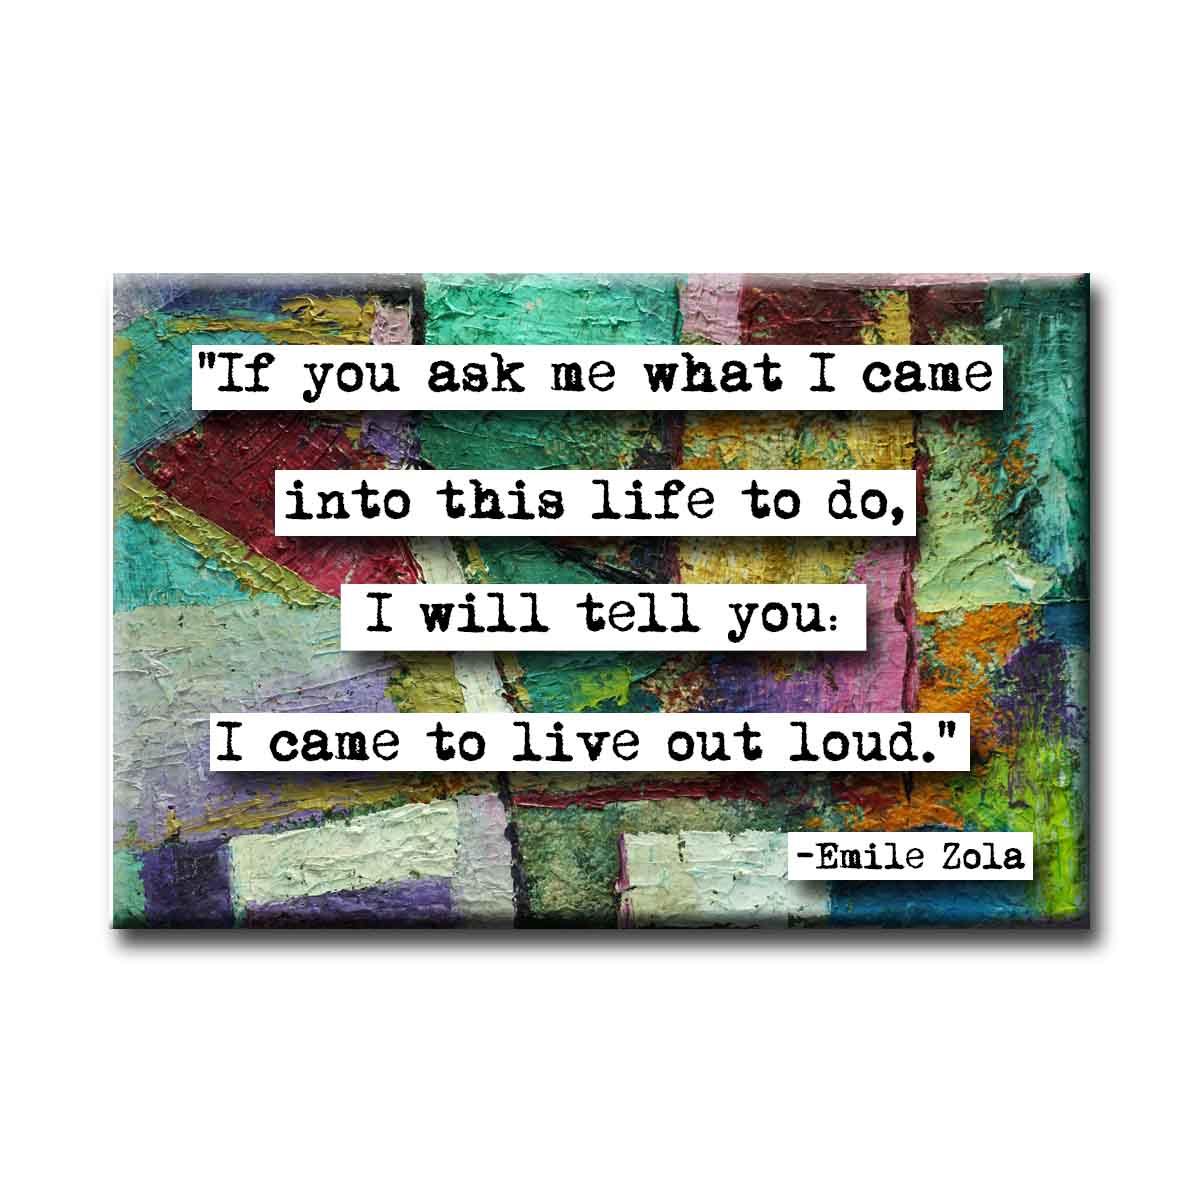 Emile Zola Live Out Loud Refrigerator Locker Quote Magnet